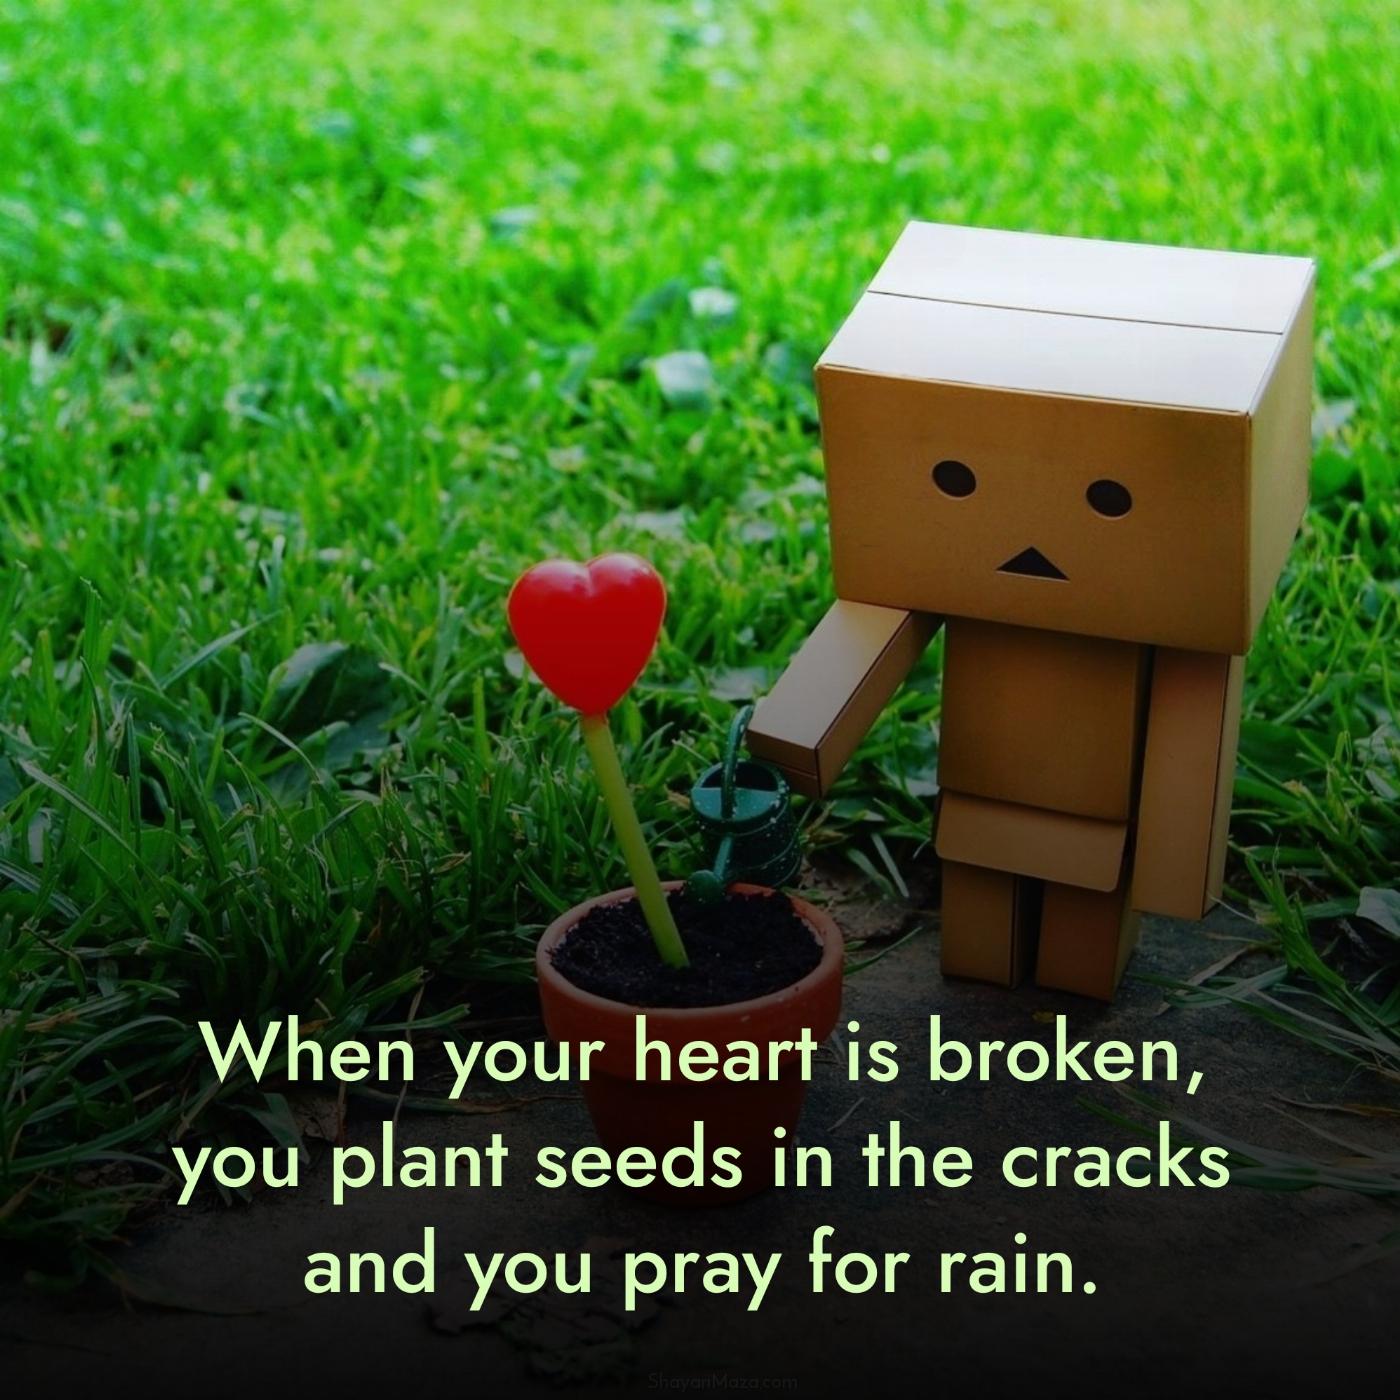 When your heart is broken you plant seeds in the cracks